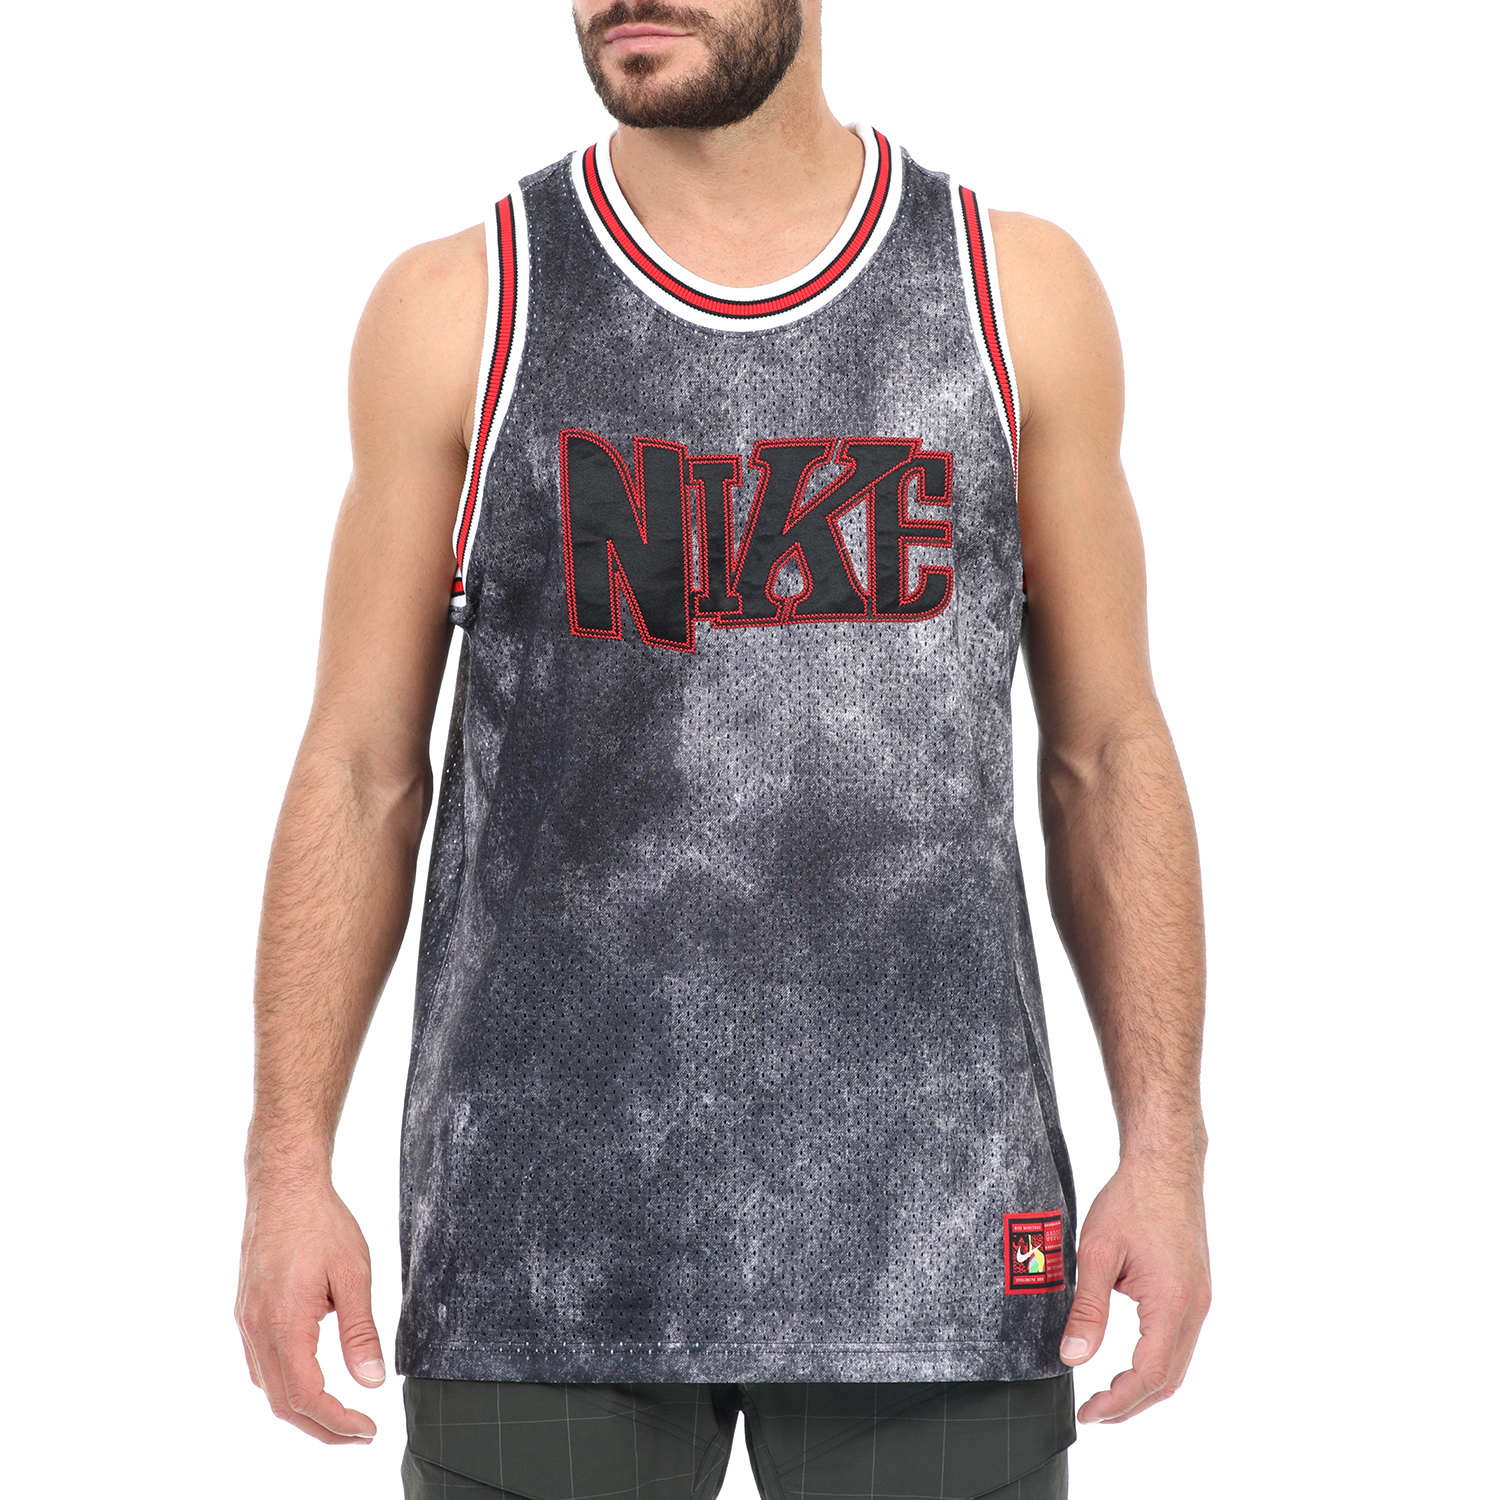 NIKE Ανδρικό φανελάκι μπάκετ NIKE DRY DNA JERSEY KMA γκρι